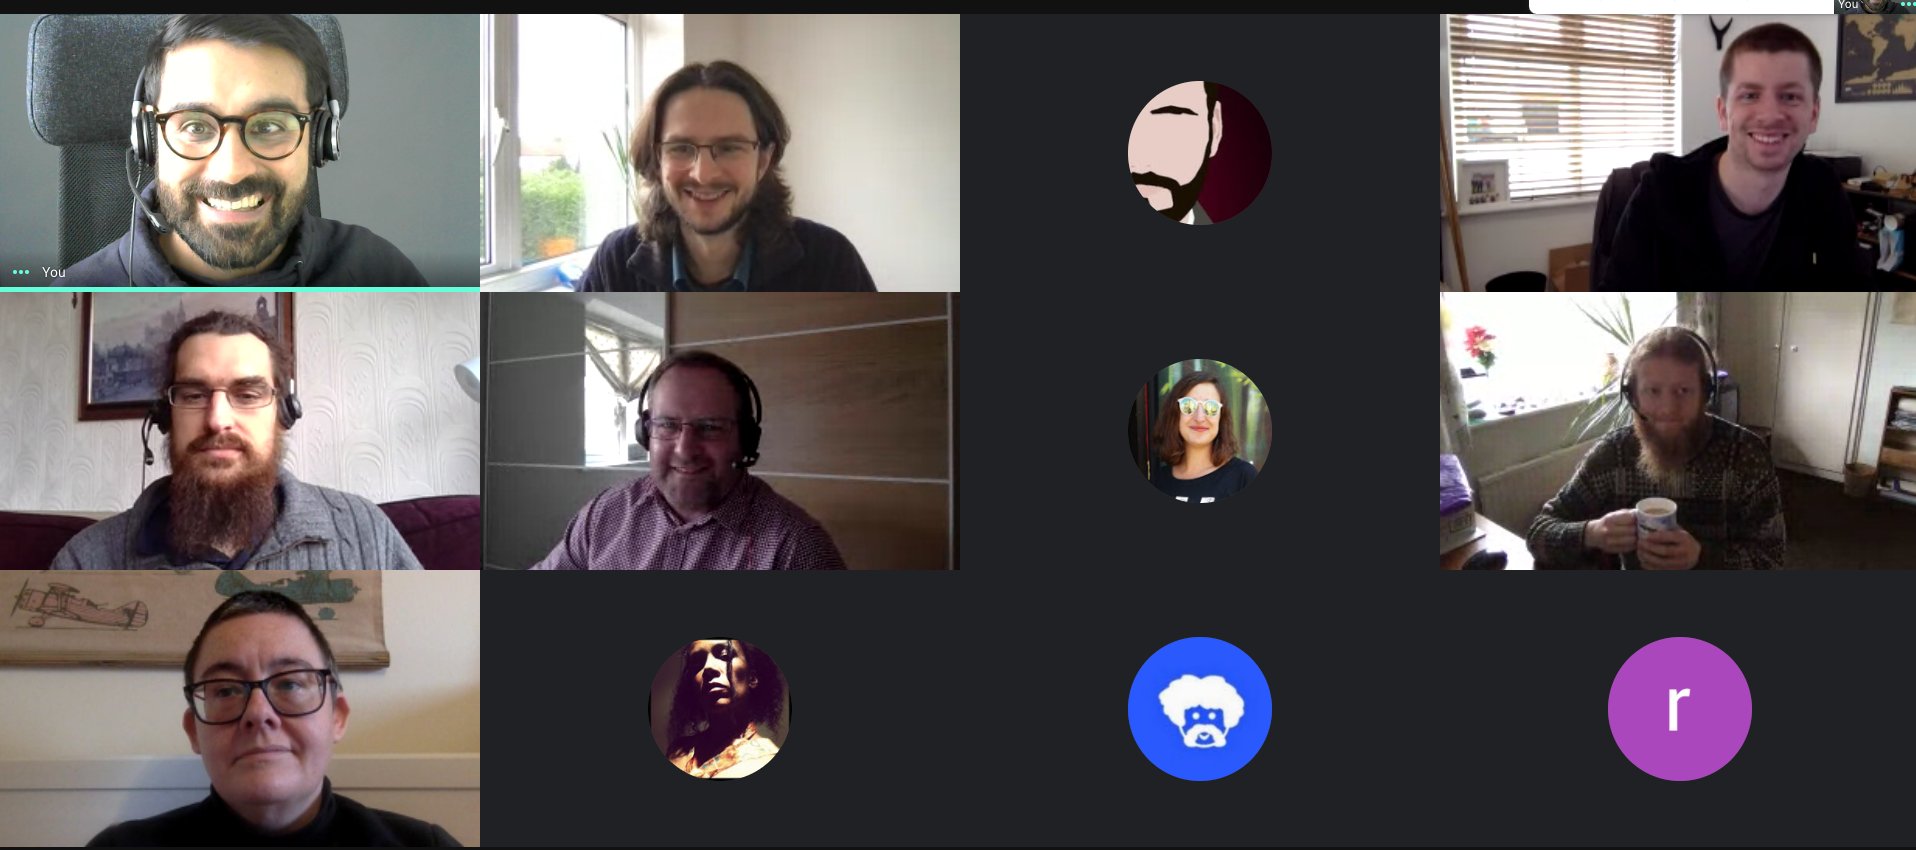 Screenshot of the group of people on the call